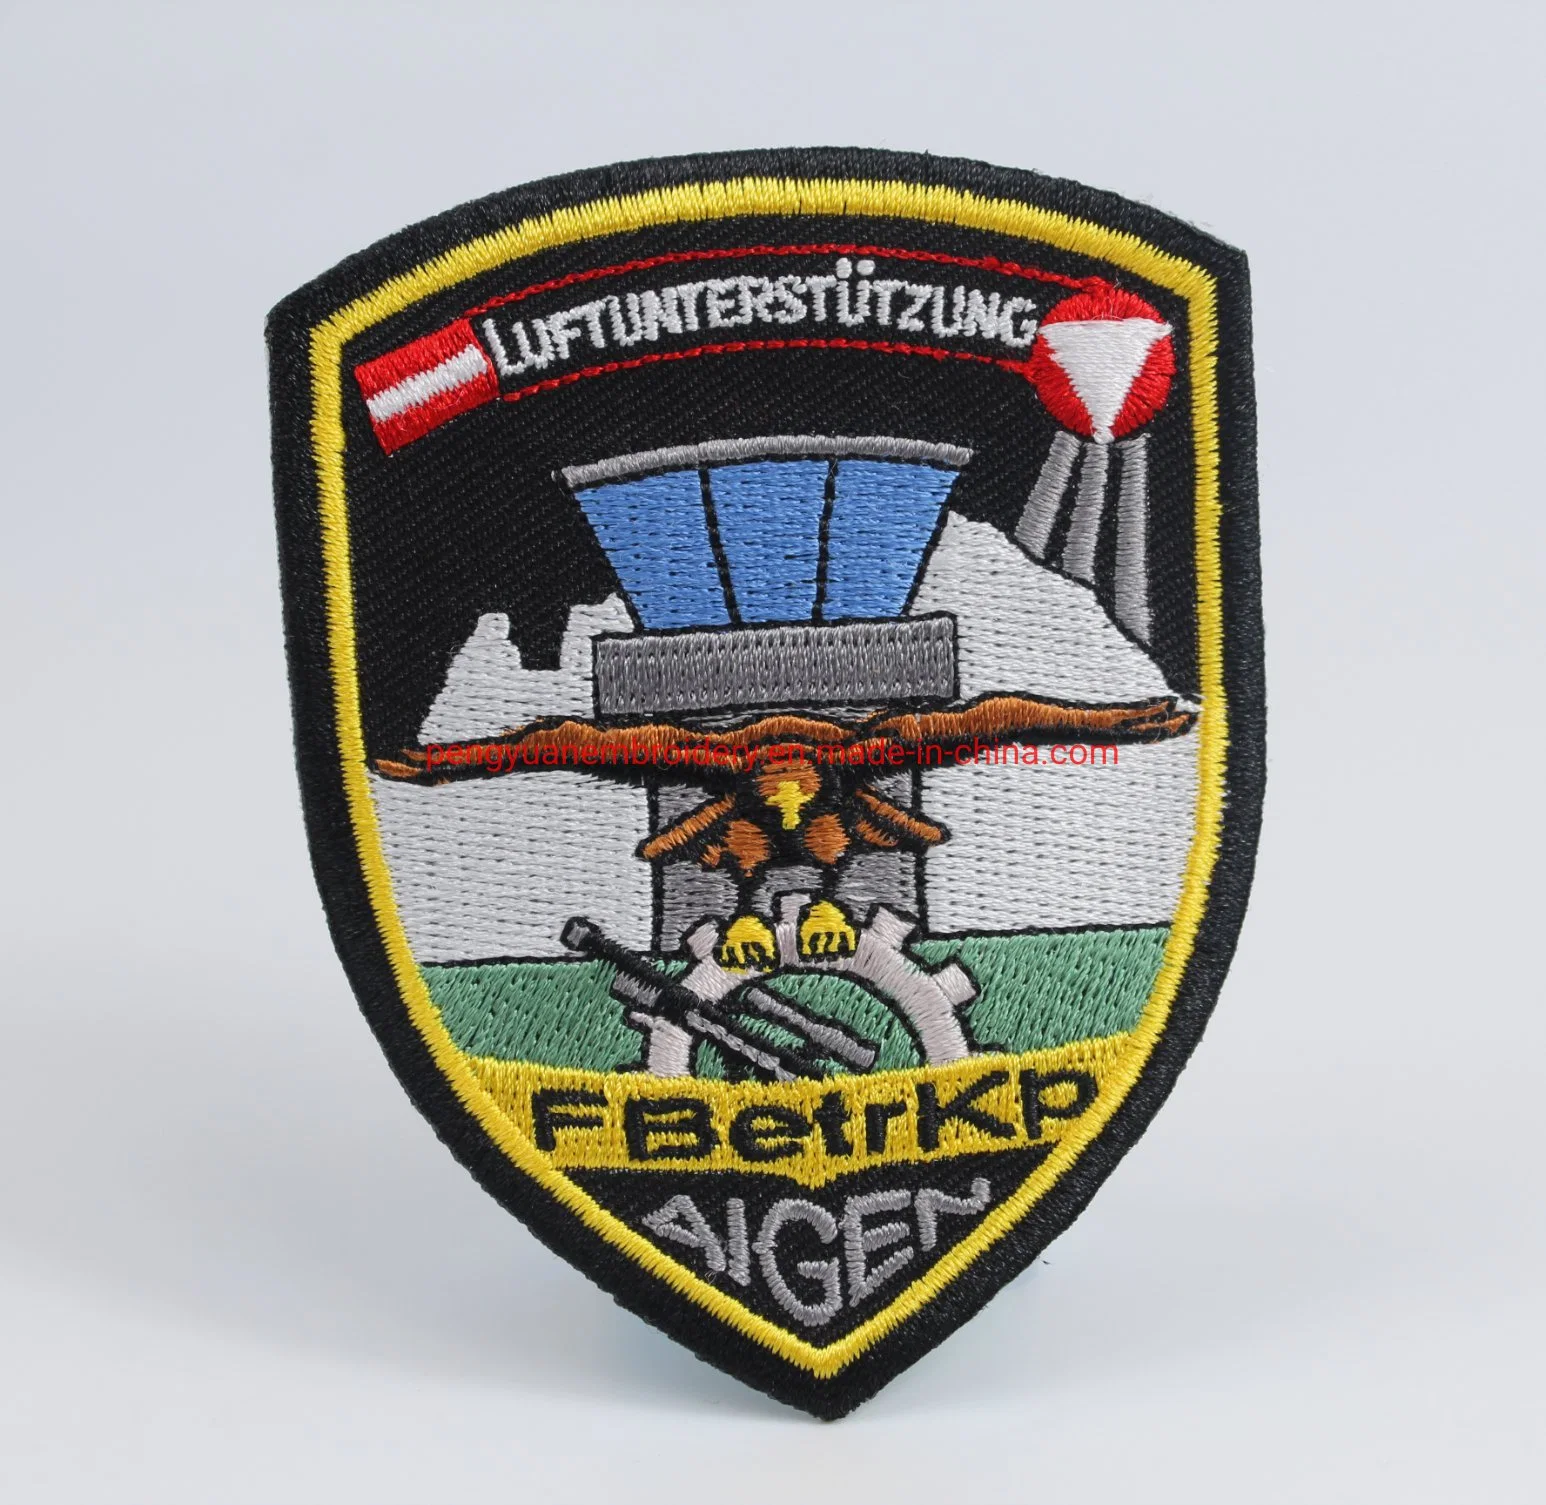 The Best Quality Police Embroidery Badge with Twill Polyester Fabric for Garment